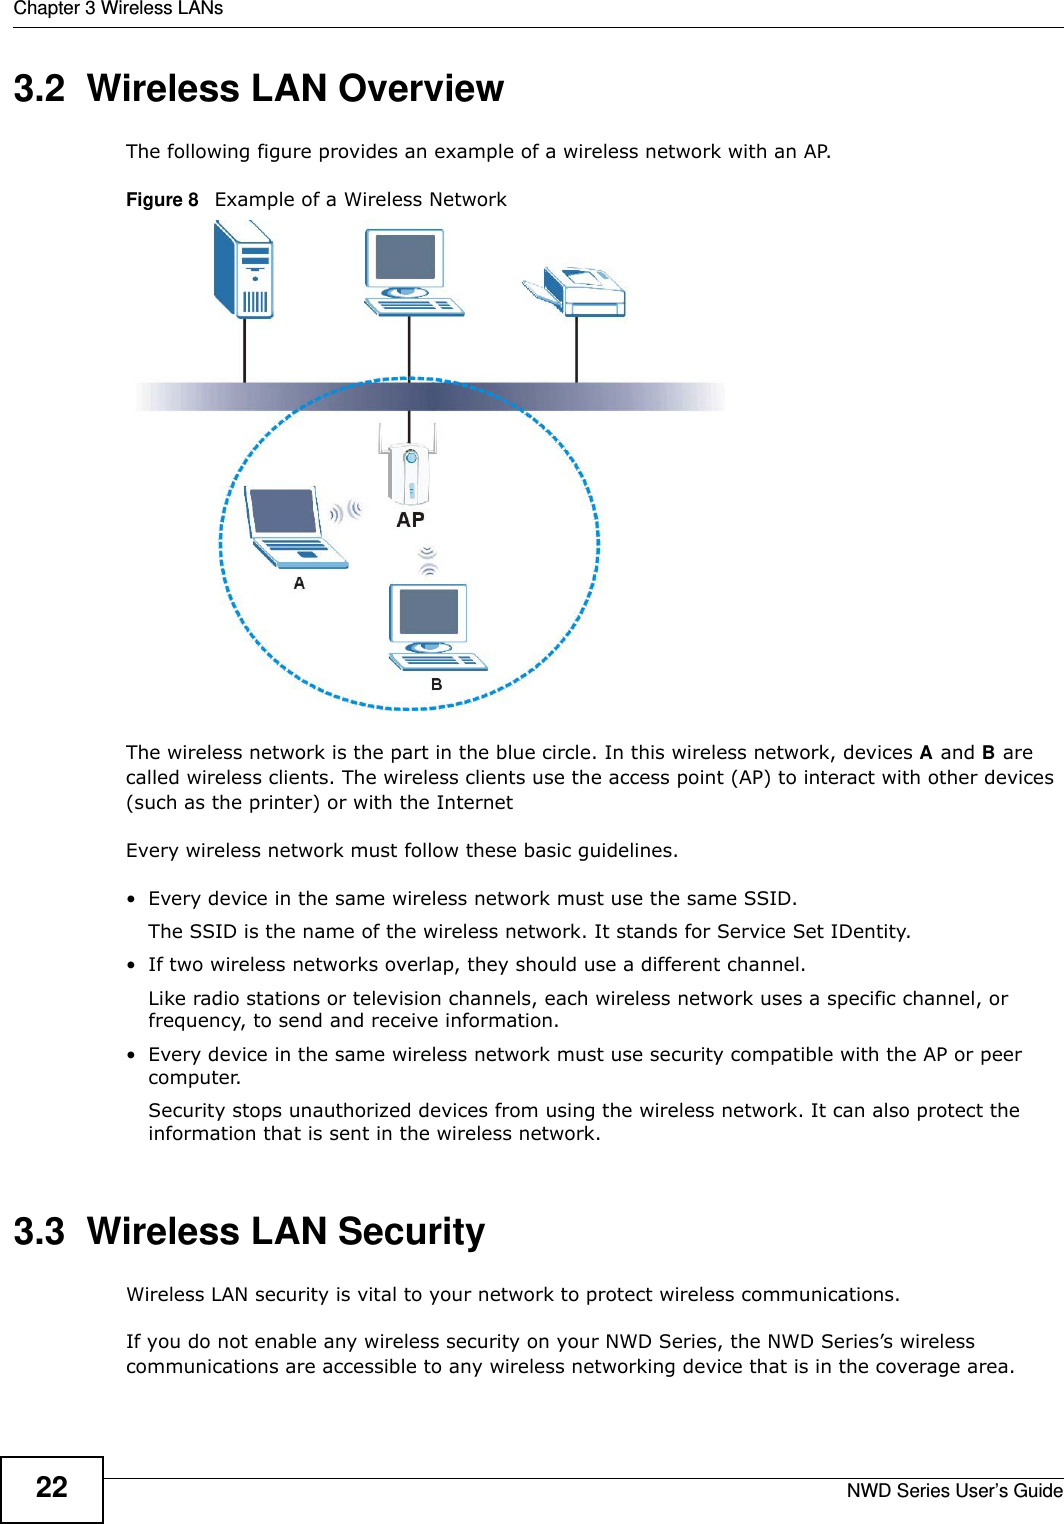 Chapter 3 Wireless LANsNWD Series User’s Guide223.2  Wireless LAN Overview The following figure provides an example of a wireless network with an AP. Figure 8   Example of a Wireless NetworkThe wireless network is the part in the blue circle. In this wireless network, devices A and B are called wireless clients. The wireless clients use the access point (AP) to interact with other devices (such as the printer) or with the InternetEvery wireless network must follow these basic guidelines.• Every device in the same wireless network must use the same SSID.The SSID is the name of the wireless network. It stands for Service Set IDentity.• If two wireless networks overlap, they should use a different channel.Like radio stations or television channels, each wireless network uses a specific channel, or frequency, to send and receive information.• Every device in the same wireless network must use security compatible with the AP or peer computer.Security stops unauthorized devices from using the wireless network. It can also protect the information that is sent in the wireless network.3.3  Wireless LAN Security Wireless LAN security is vital to your network to protect wireless communications.If you do not enable any wireless security on your NWD Series, the NWD Series’s wireless communications are accessible to any wireless networking device that is in the coverage area. 